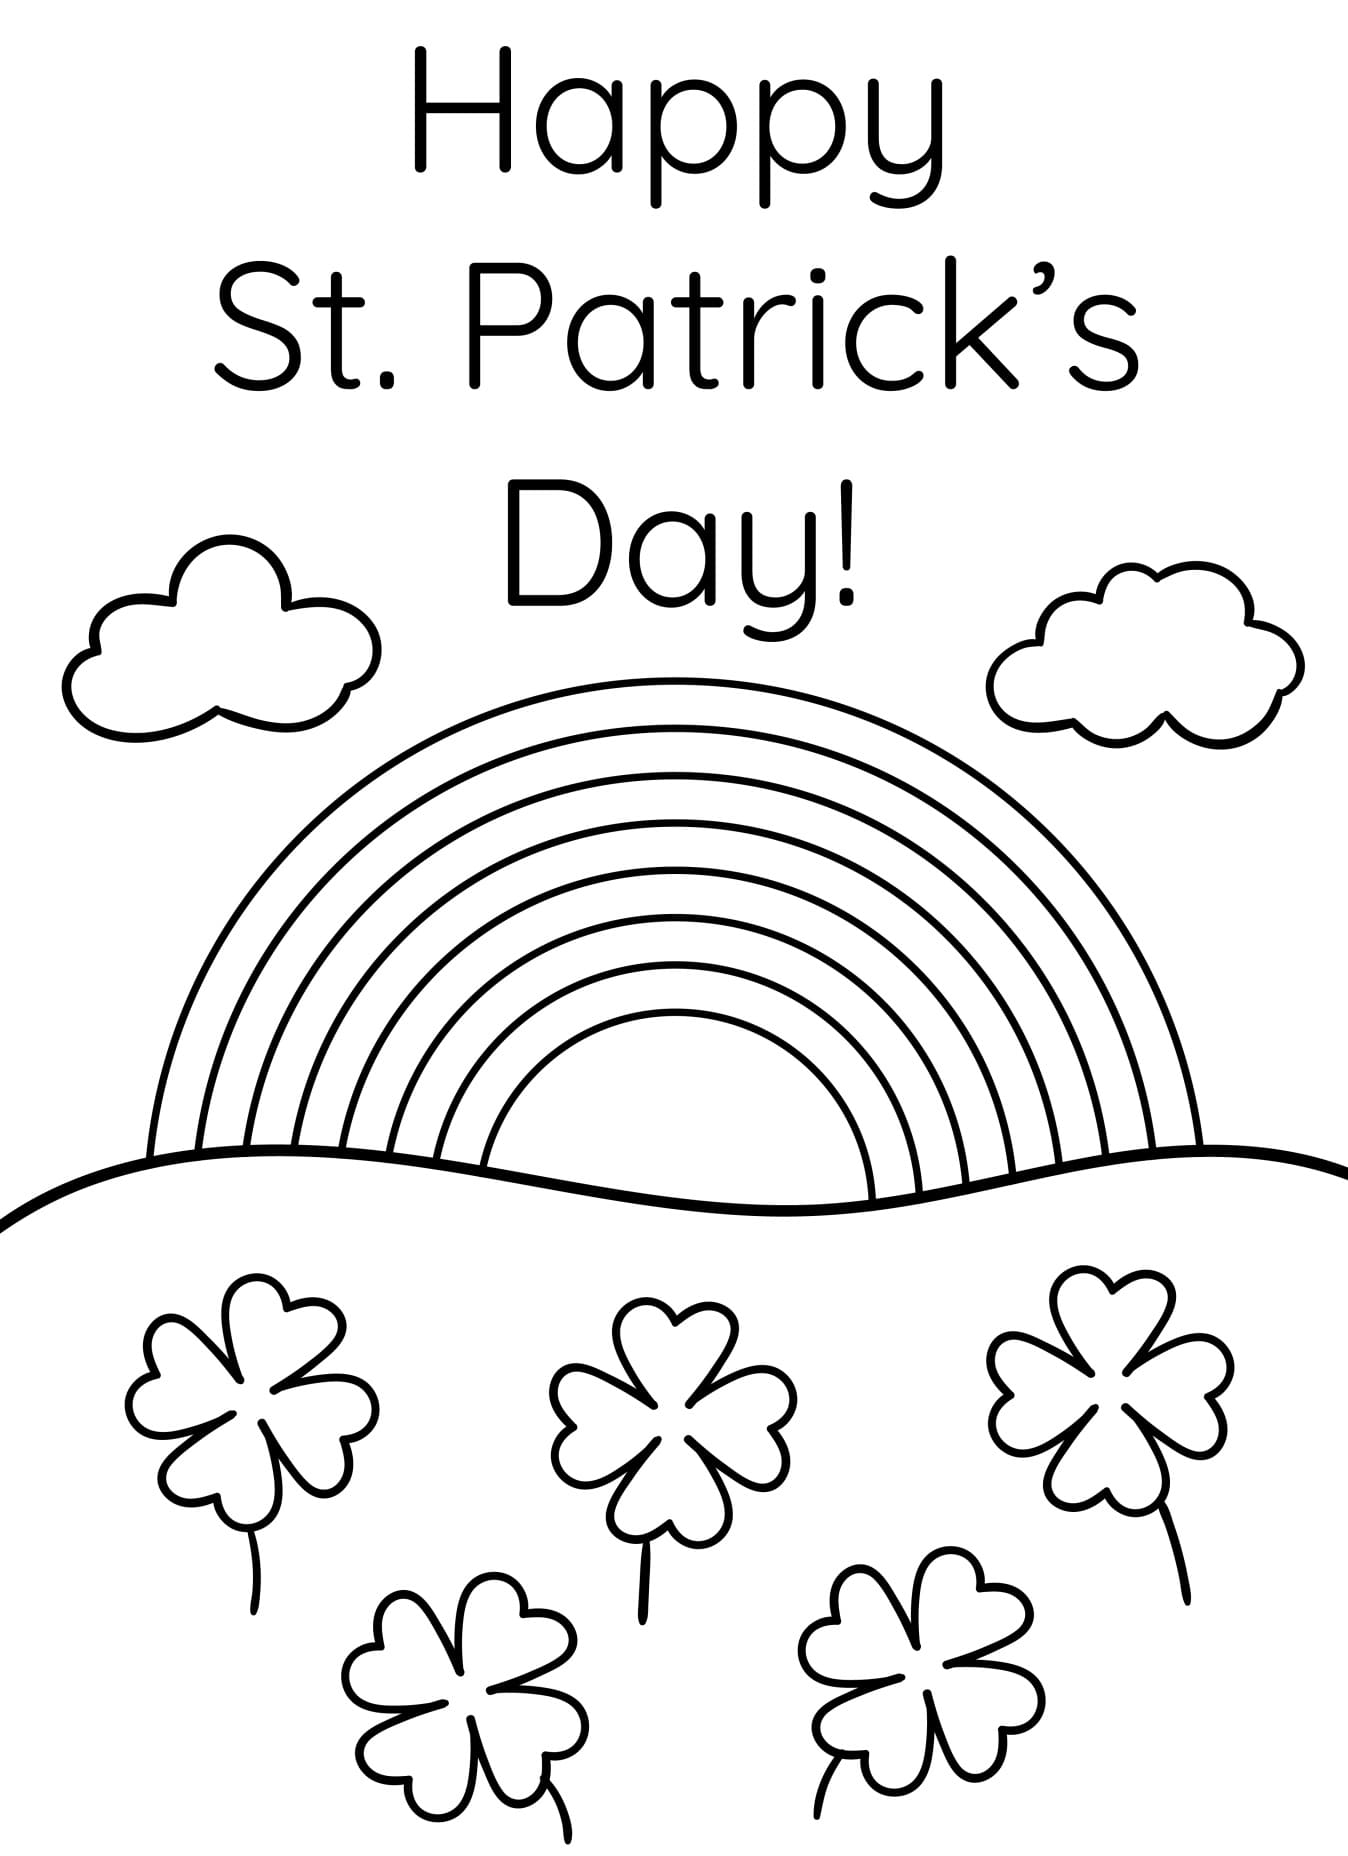 free-happy-st-patrick-s-day-coloring-page-free-printable-coloring